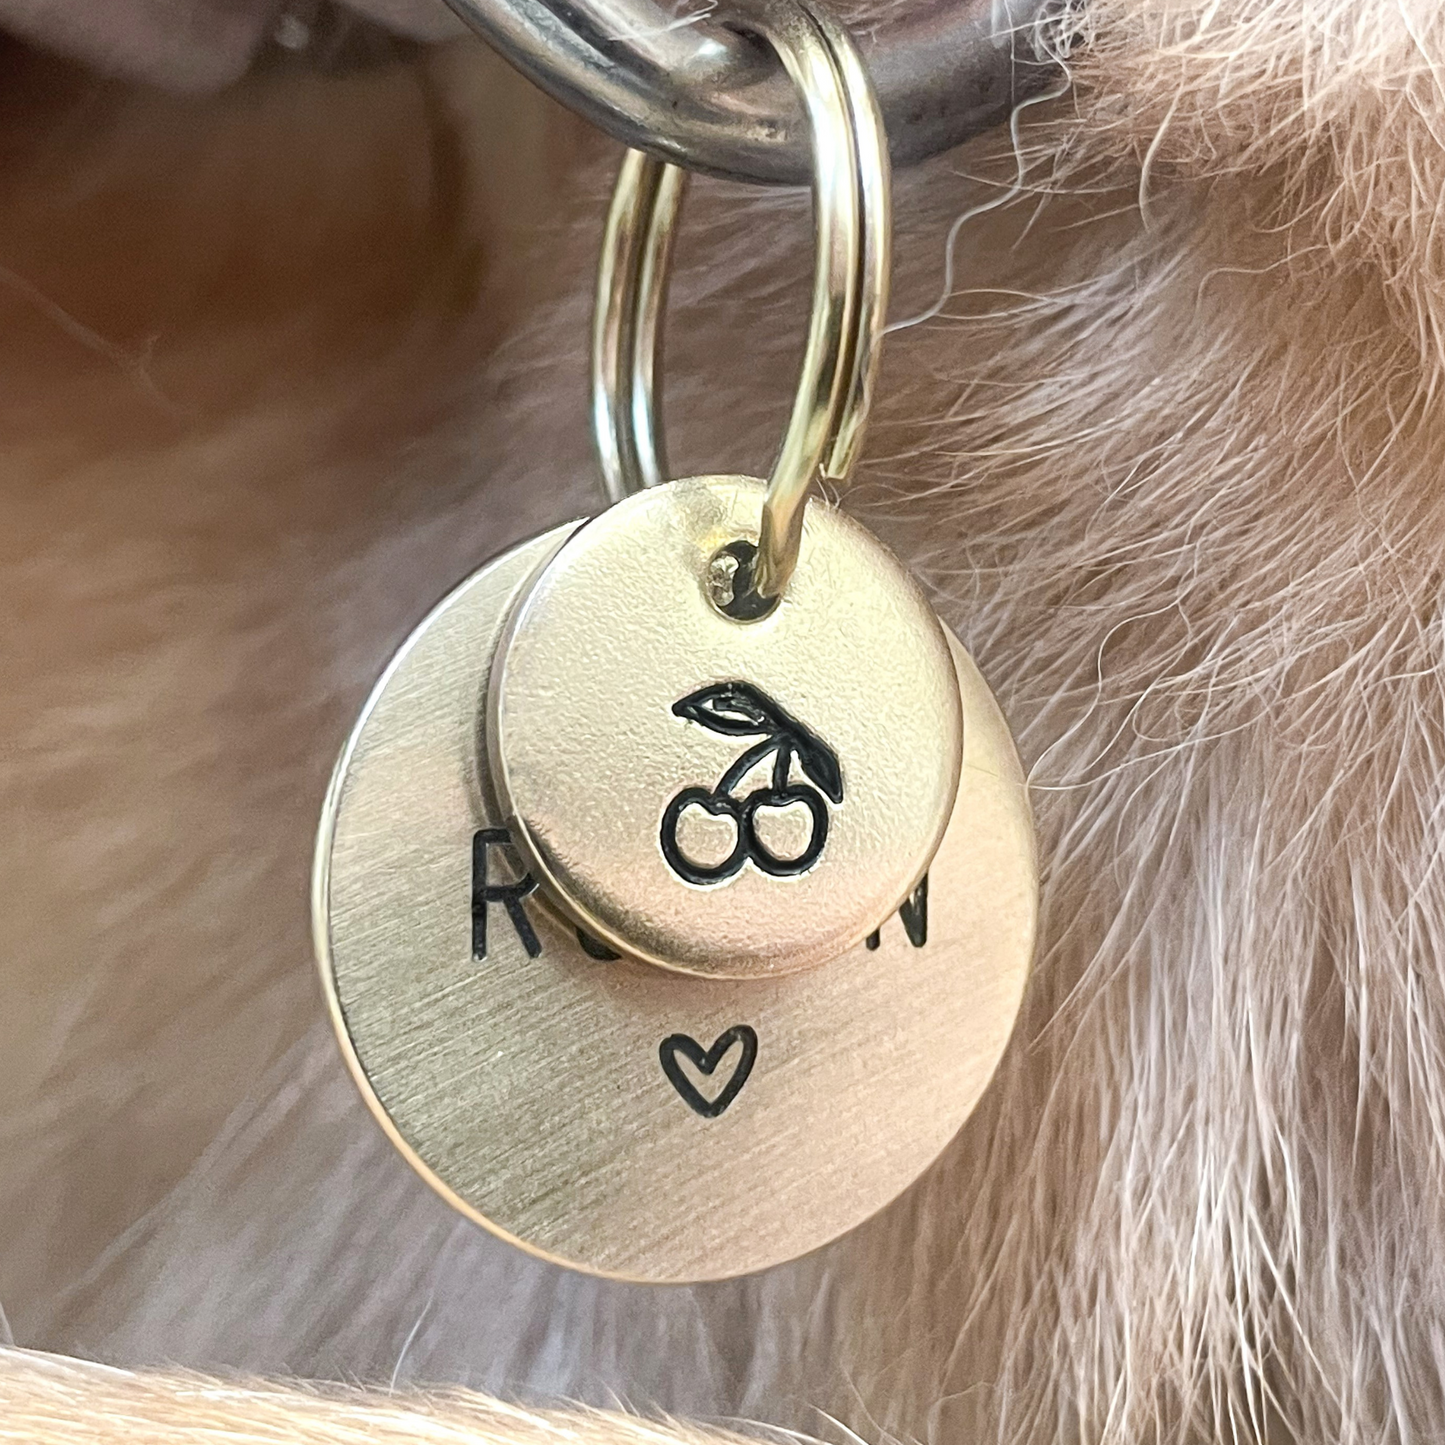 Personalized Dog Collar Charm - Engraved Design - Dog Collar Charm - Nature - Food - Fruit